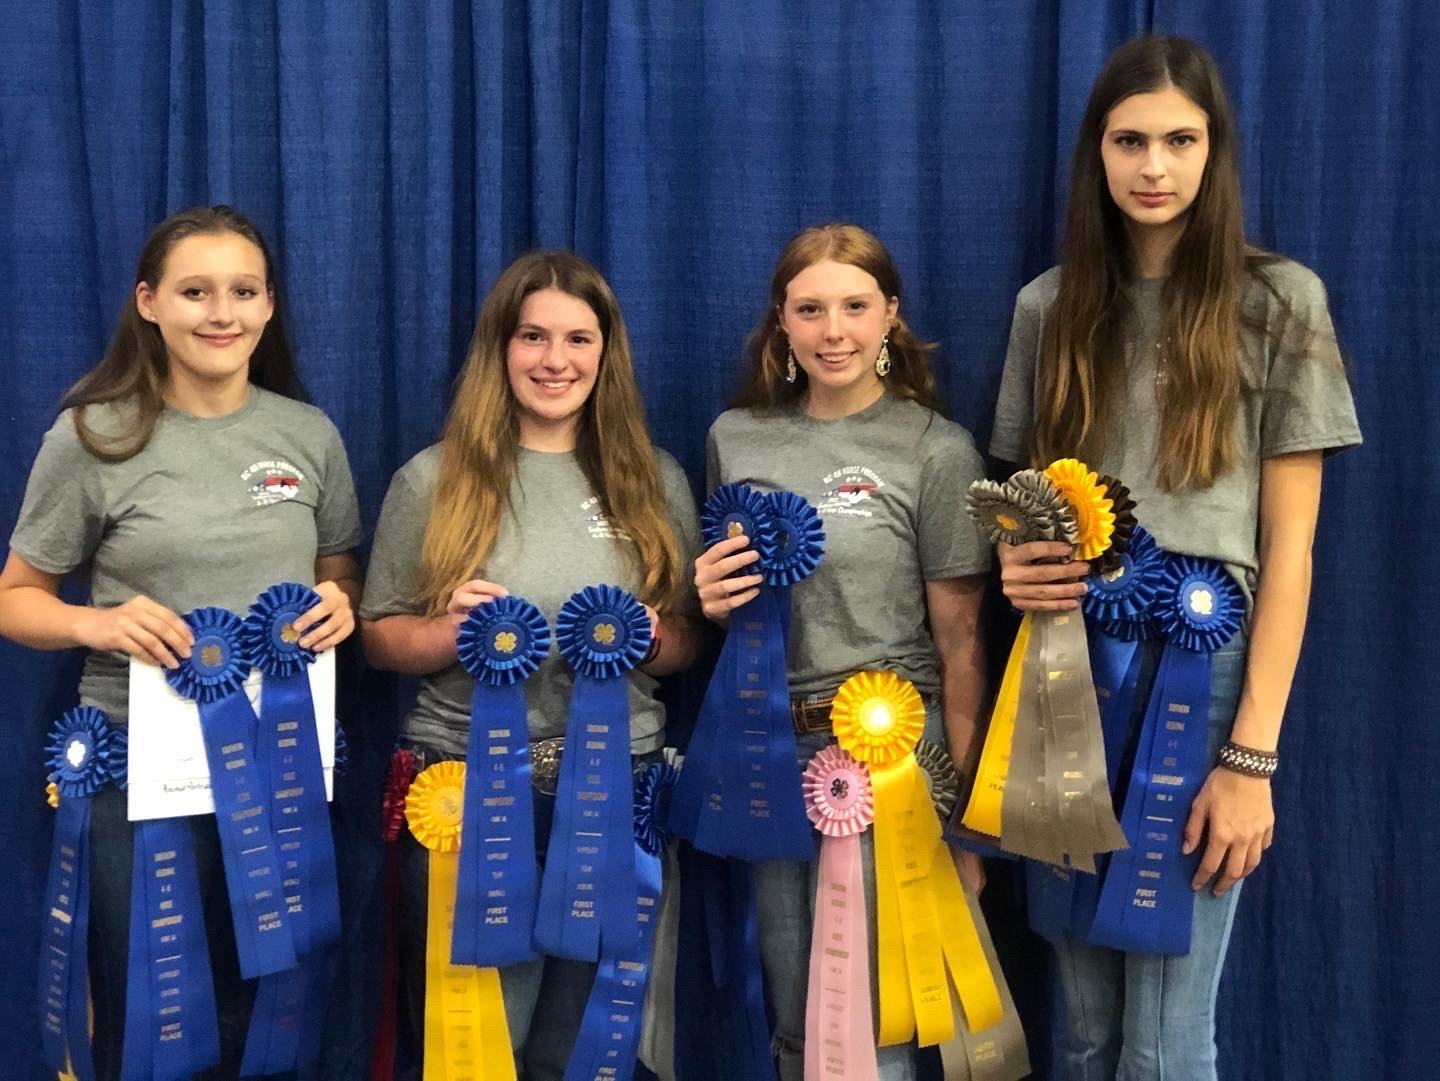 Southern Regional 4-H Horse Champion Educational Contest